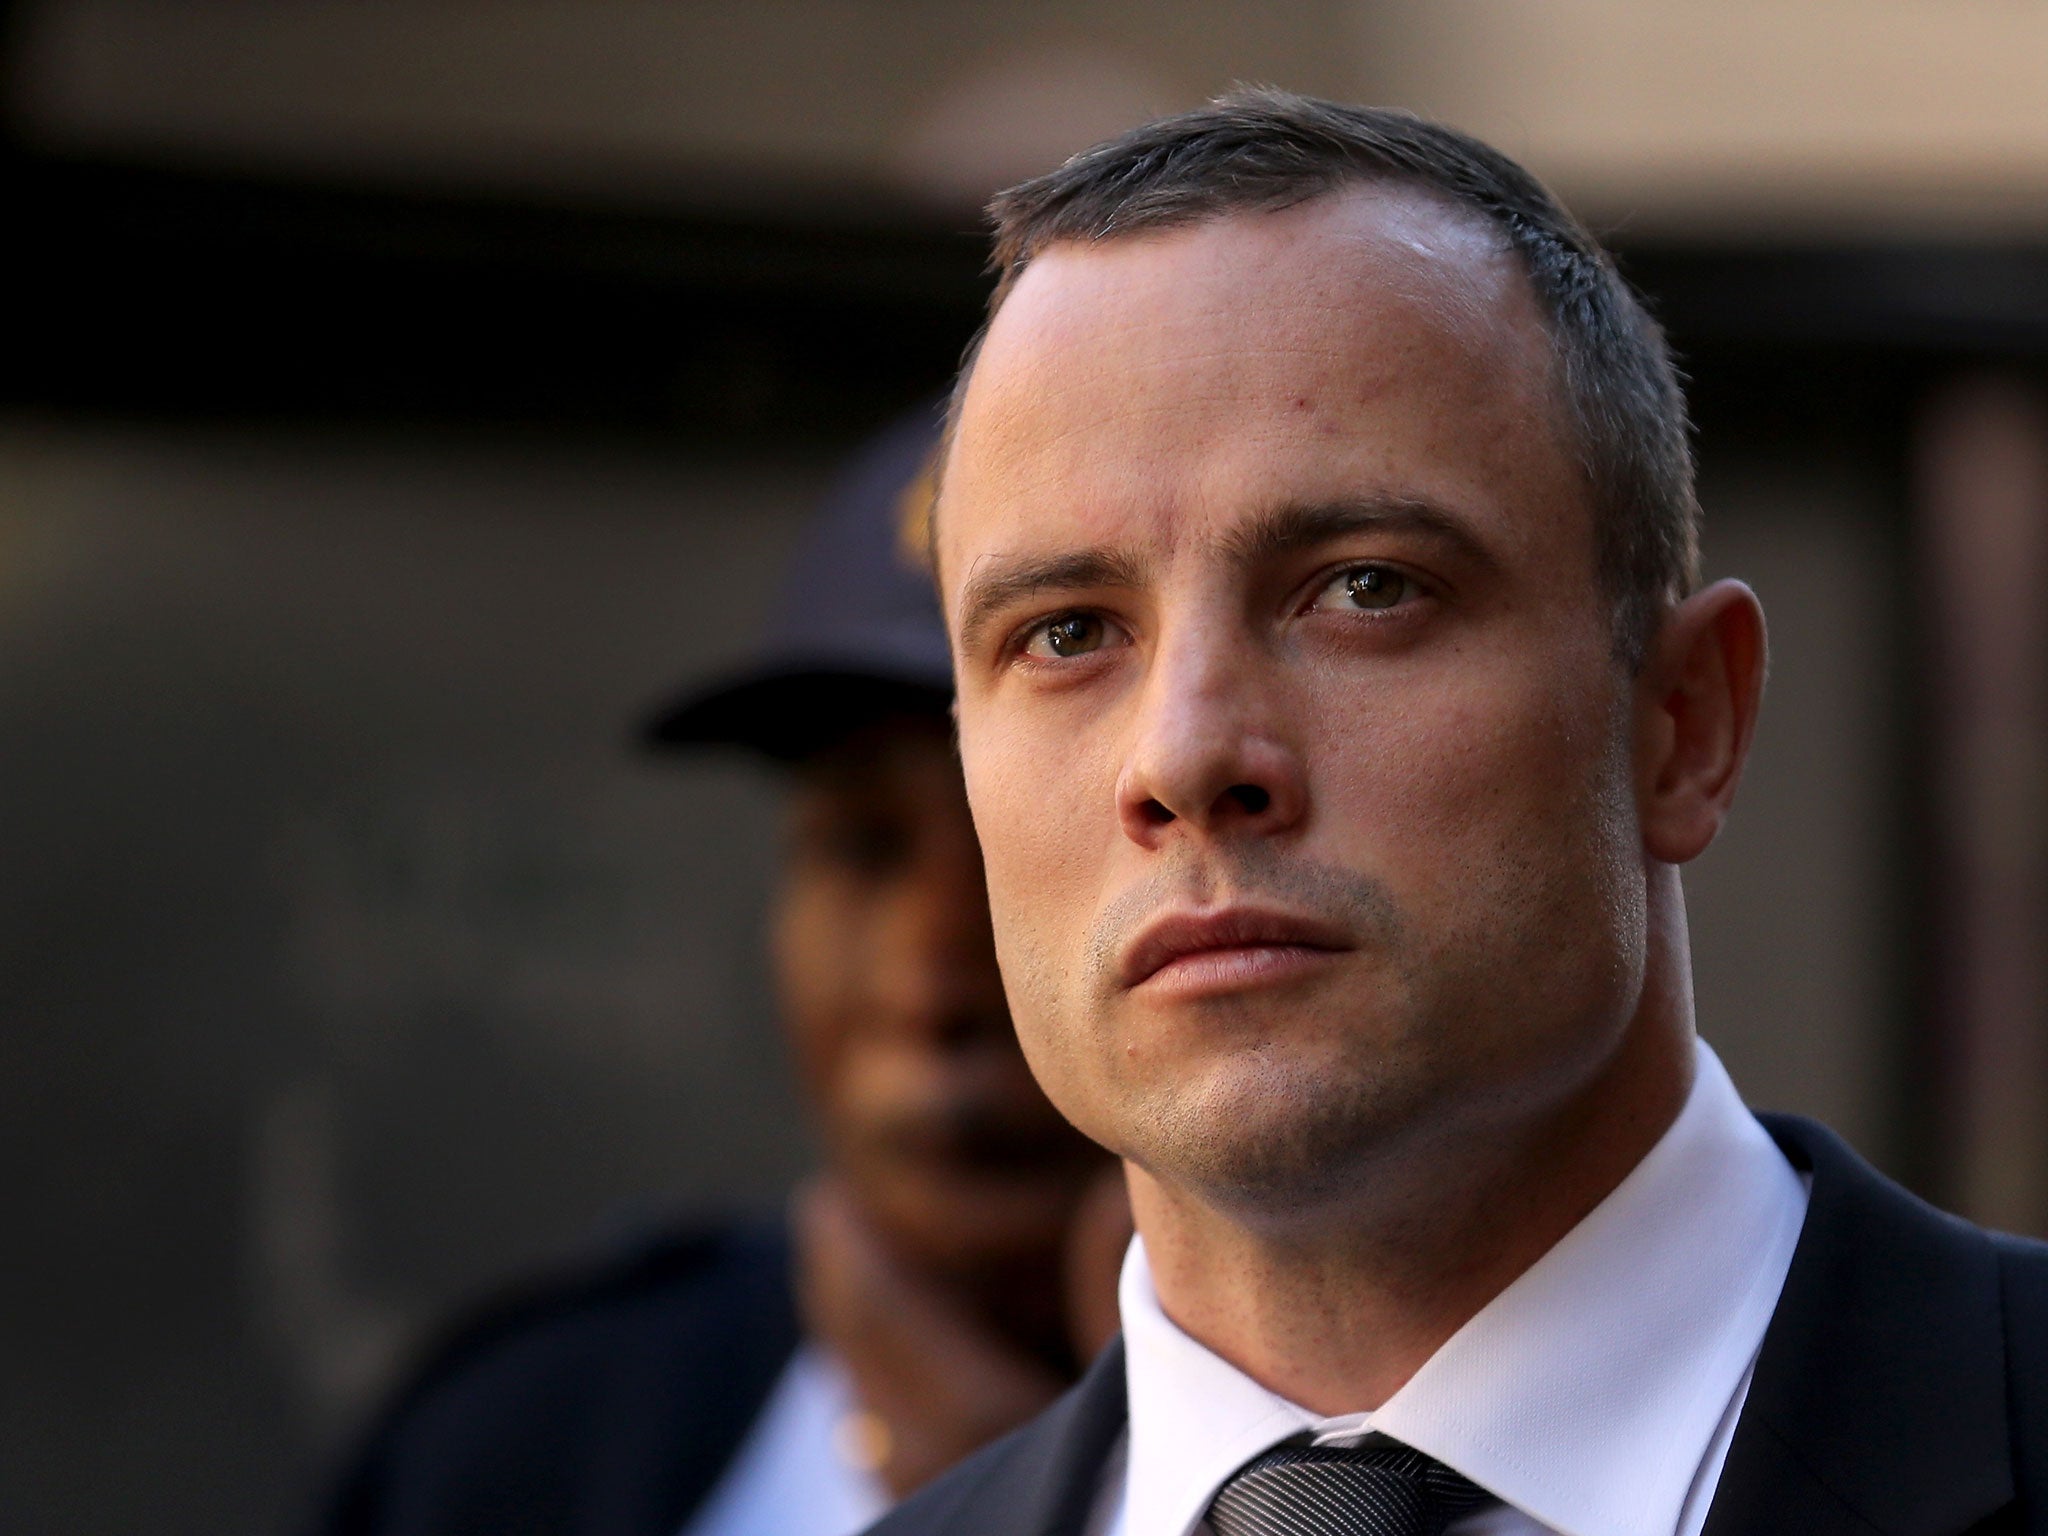 Oscar Pistorius must remain in jail, a review board has decided